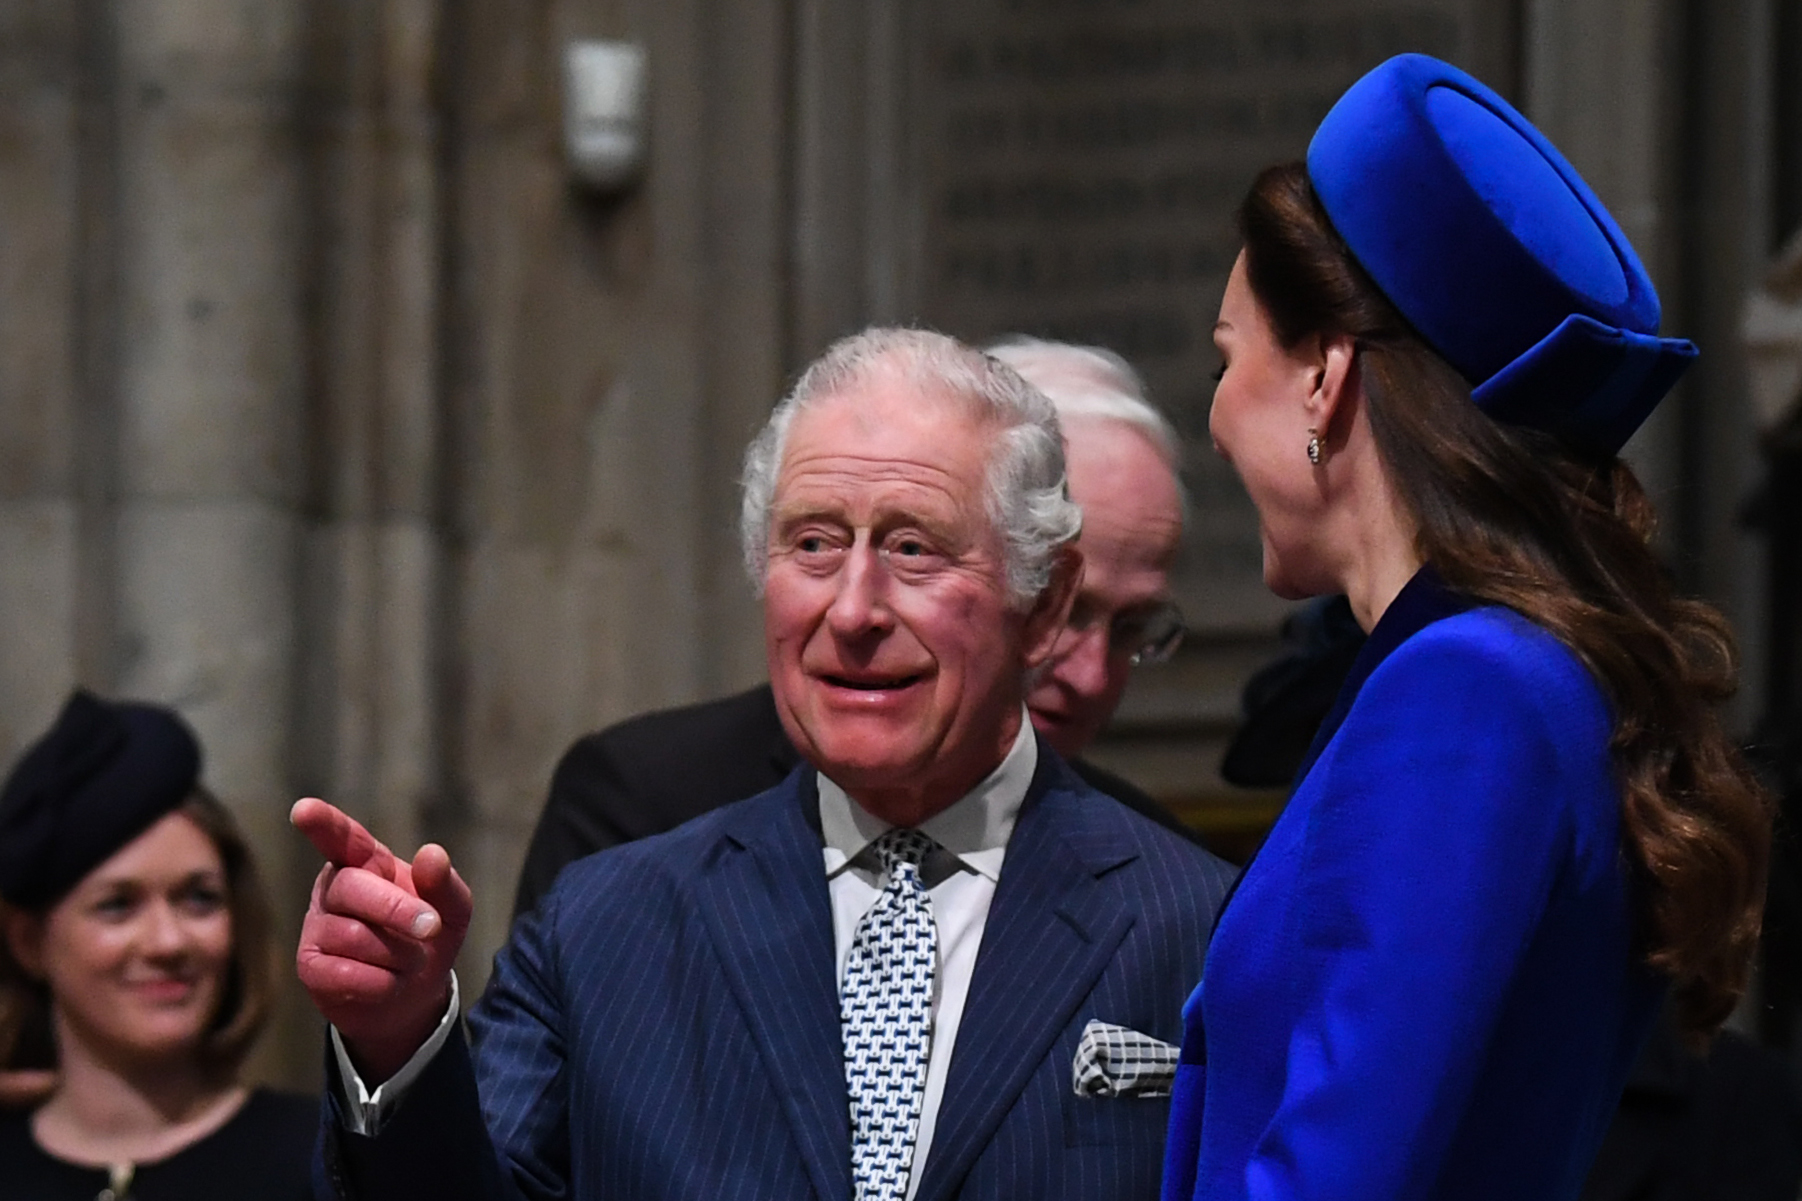 King Charles III and Princess Catherine at the Commonwealth Day service ceremony at Westminster Abbey on March 14, 2022 in London, England | Source: Getty Images